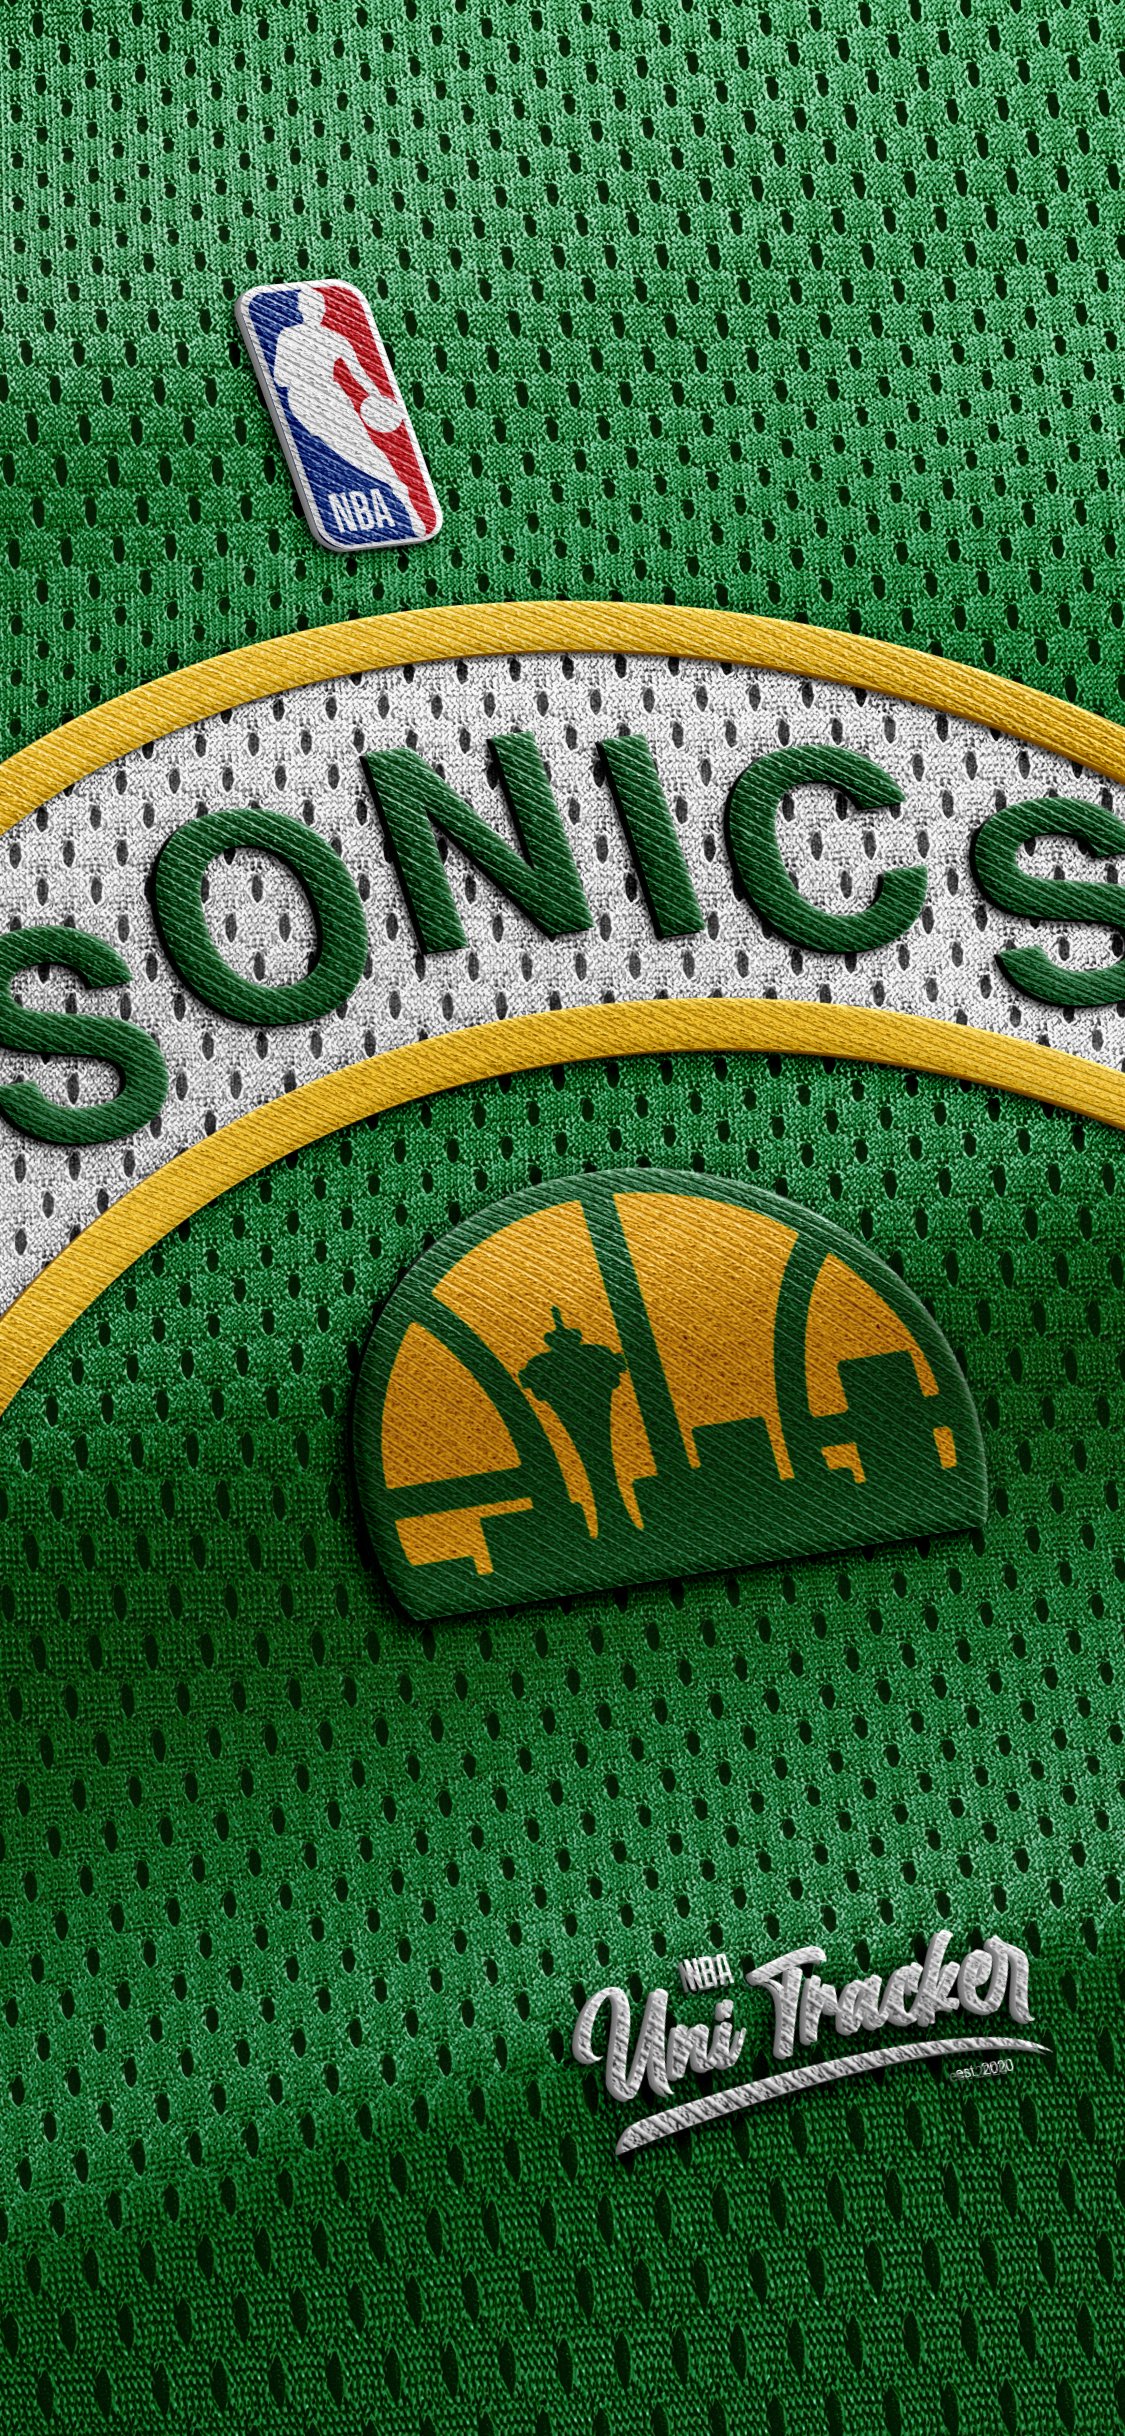 Seattle Supersonics Wallpapers